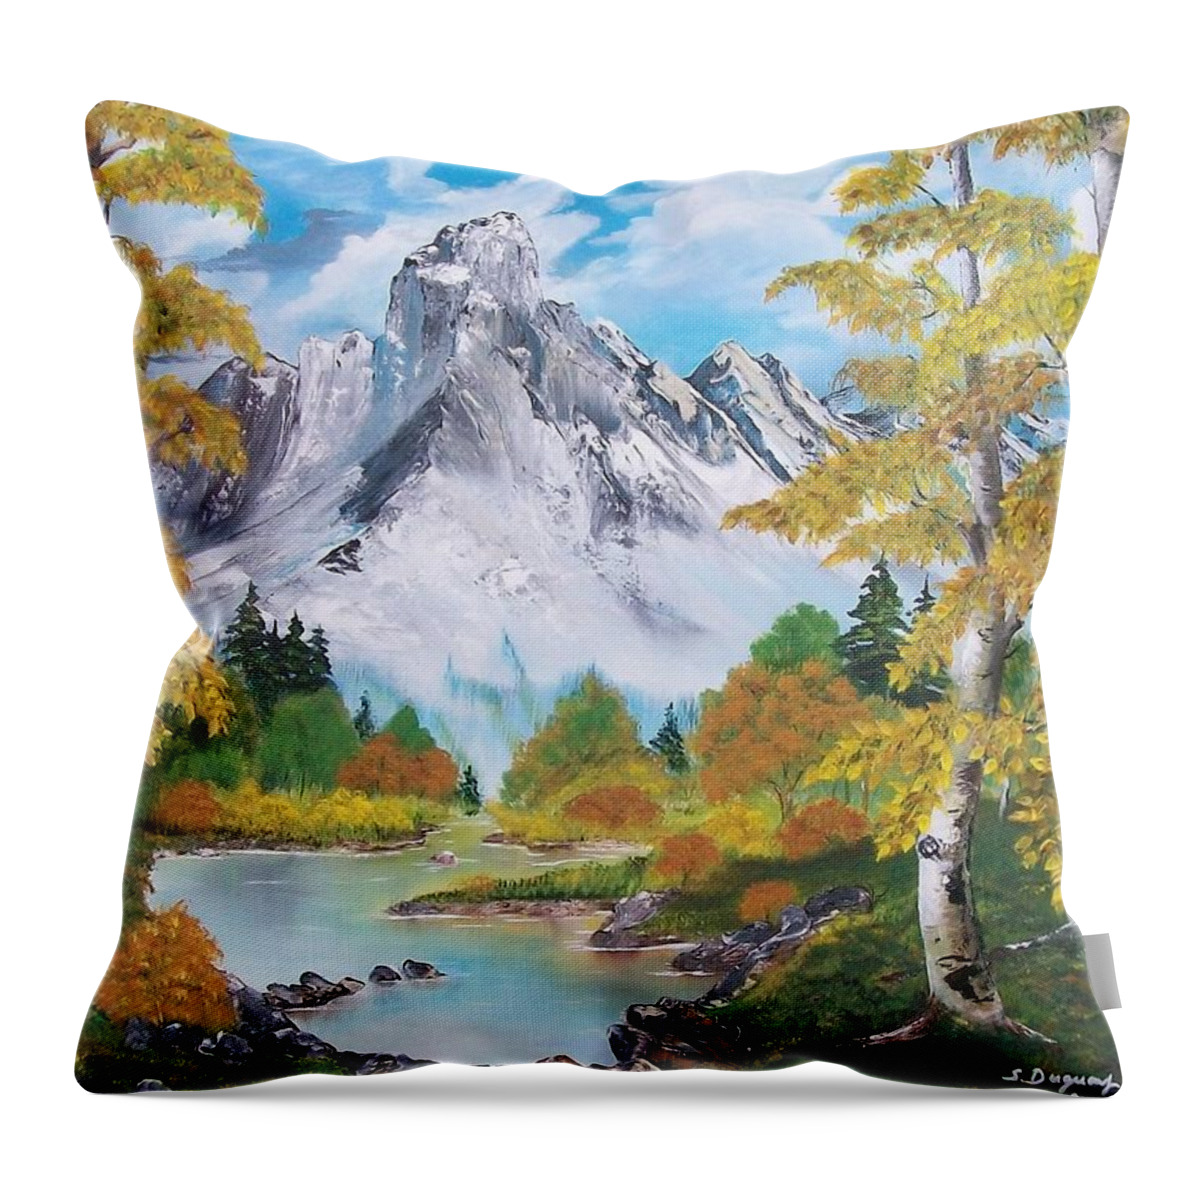  Throw Pillow featuring the painting Nature's Beauty by Sharon Duguay